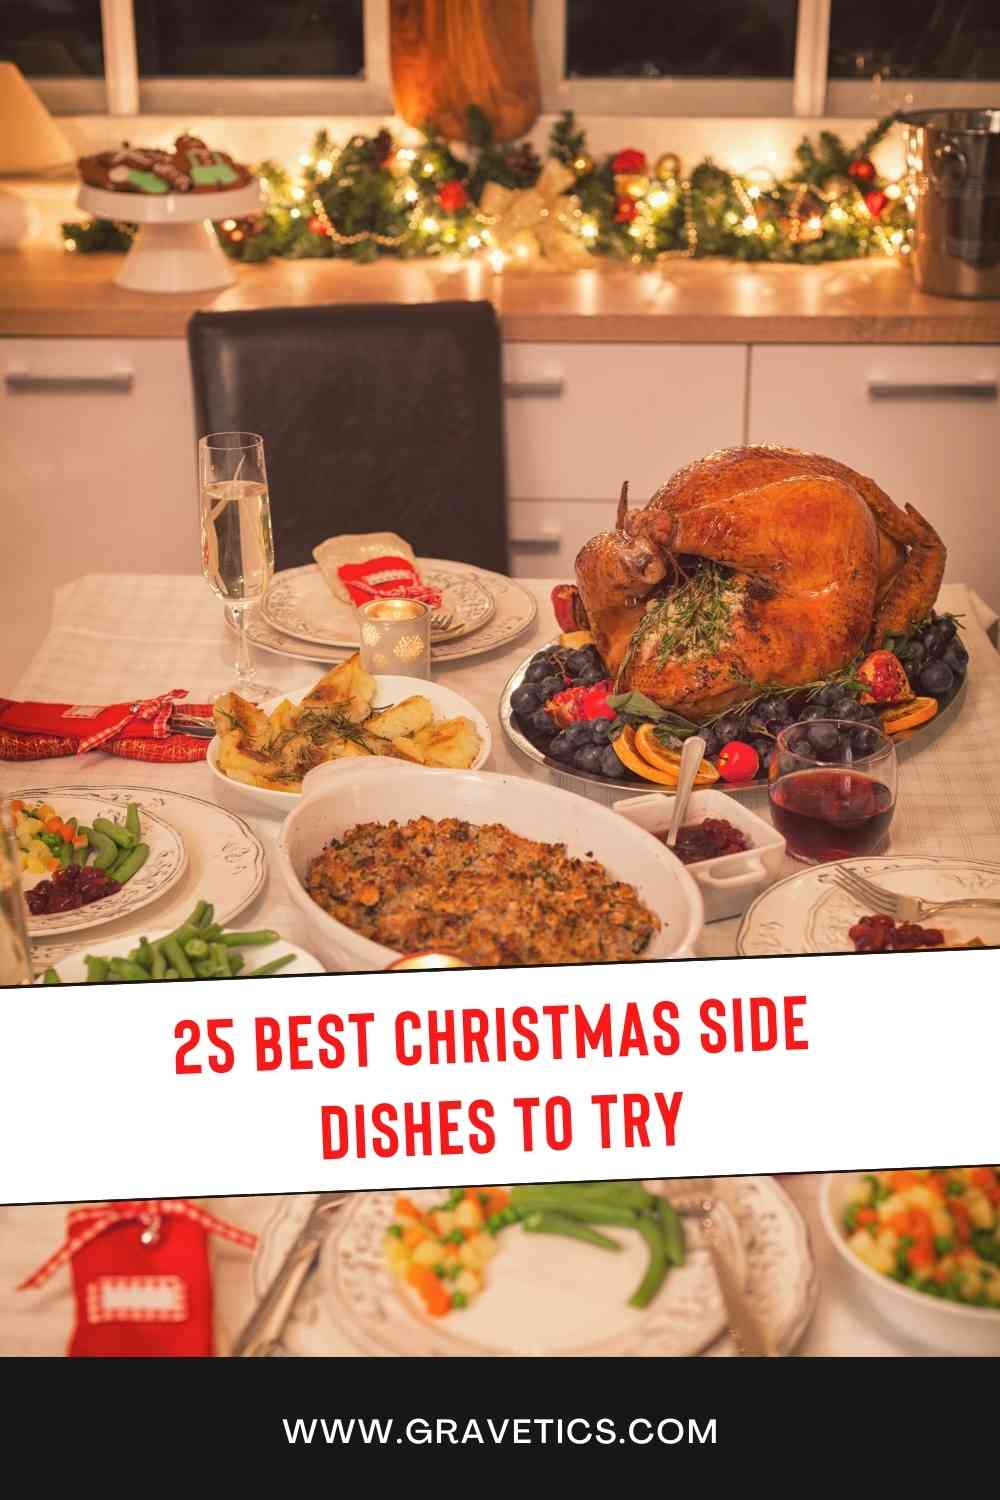 25 Best Christmas Side Dishes To Try